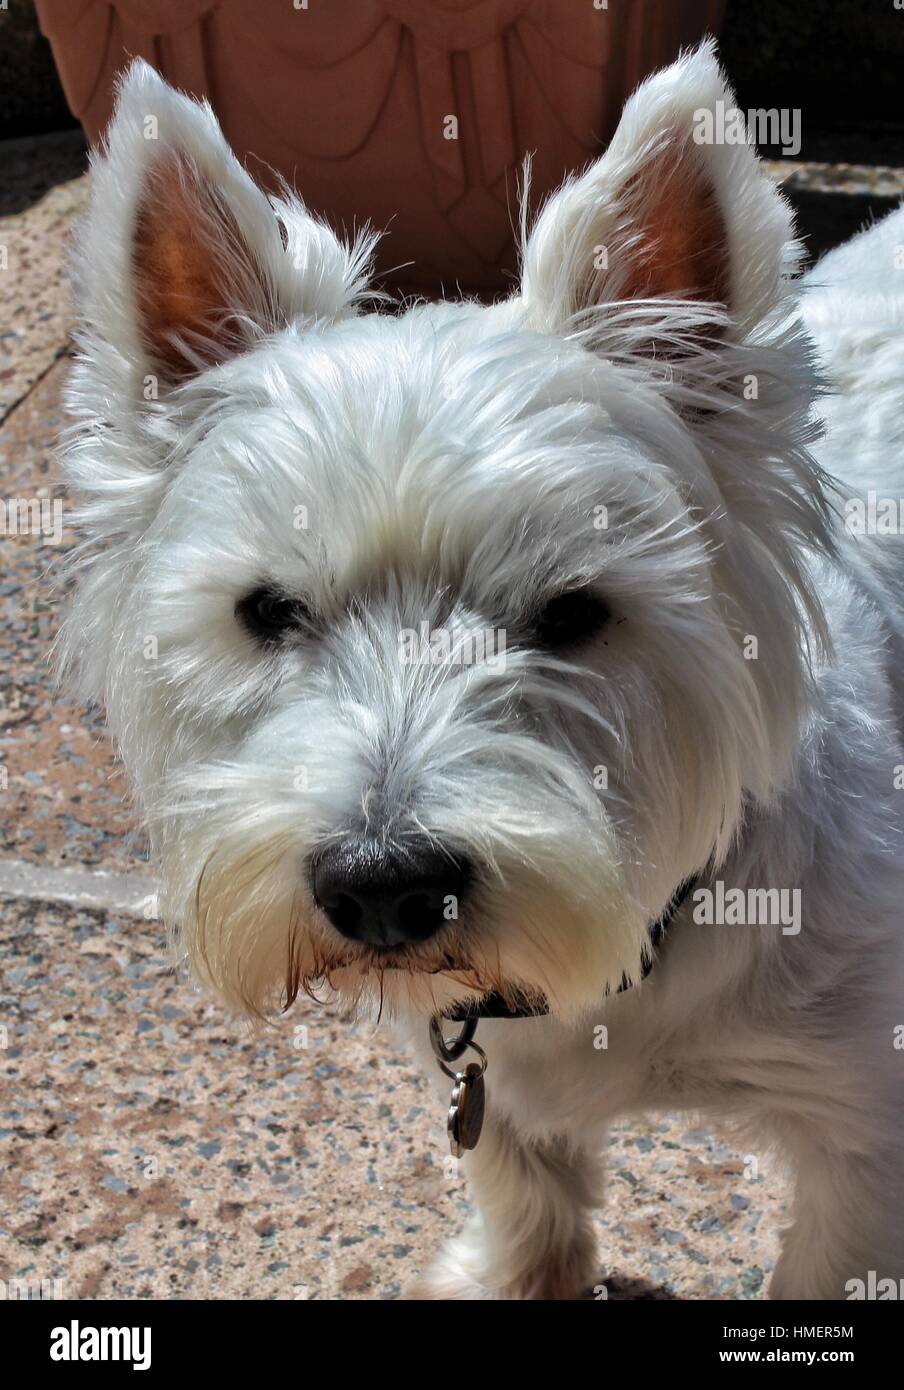 West Highland Terrier Stock Photo